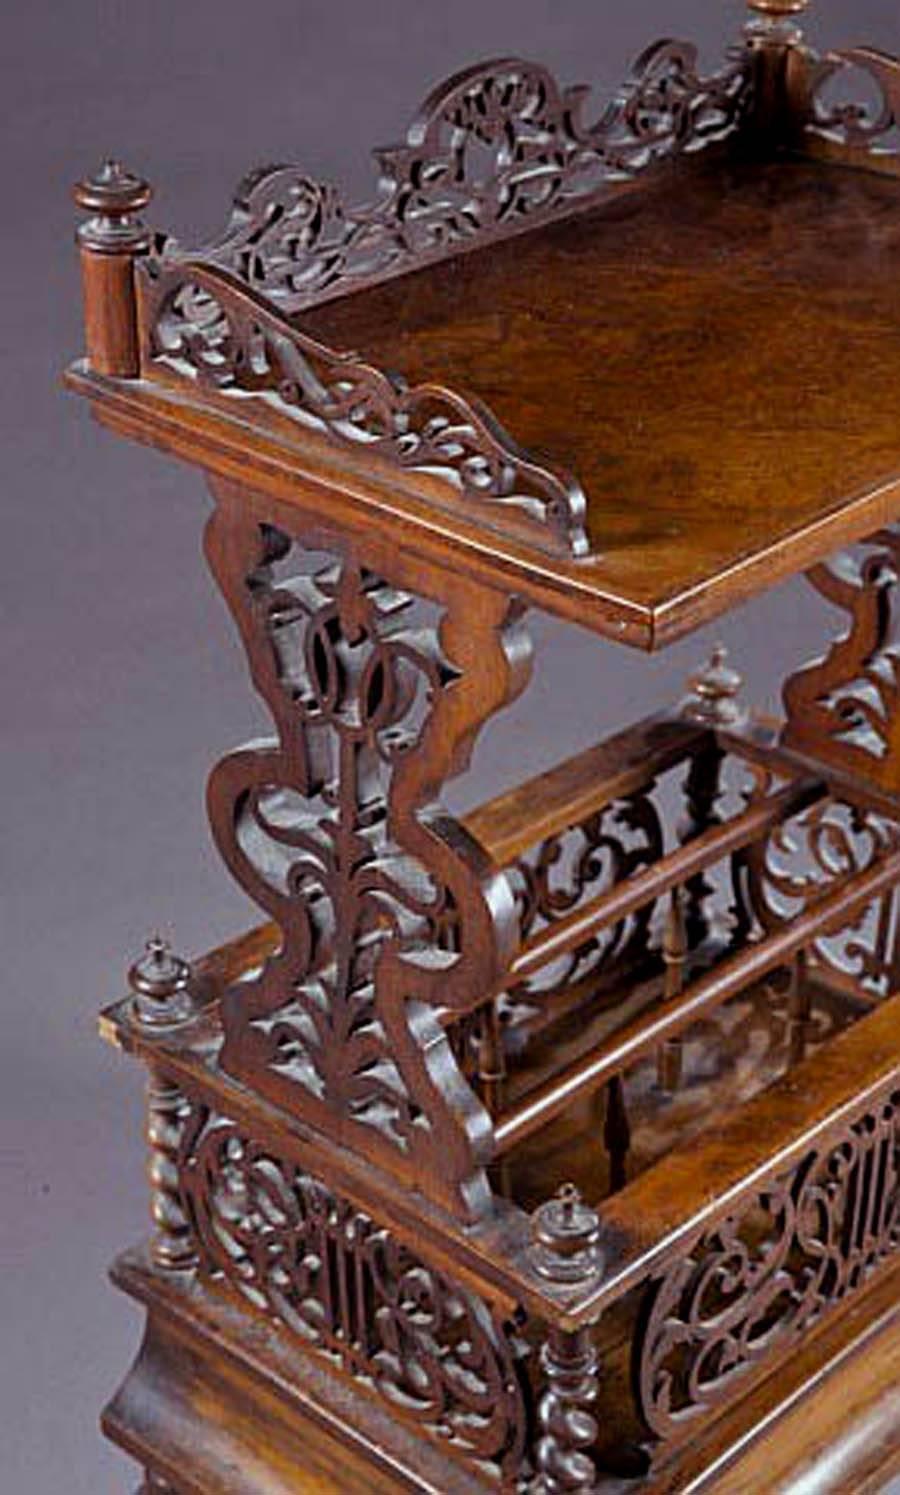 Fine Antique Renaissance Revival Burled Walnut Canterbury or Whatnot, with a rectangular top shelf with a three quarter pierced gallery supported by pierced vasiform side panels. The lower section with dividers and openwork front, side  and back